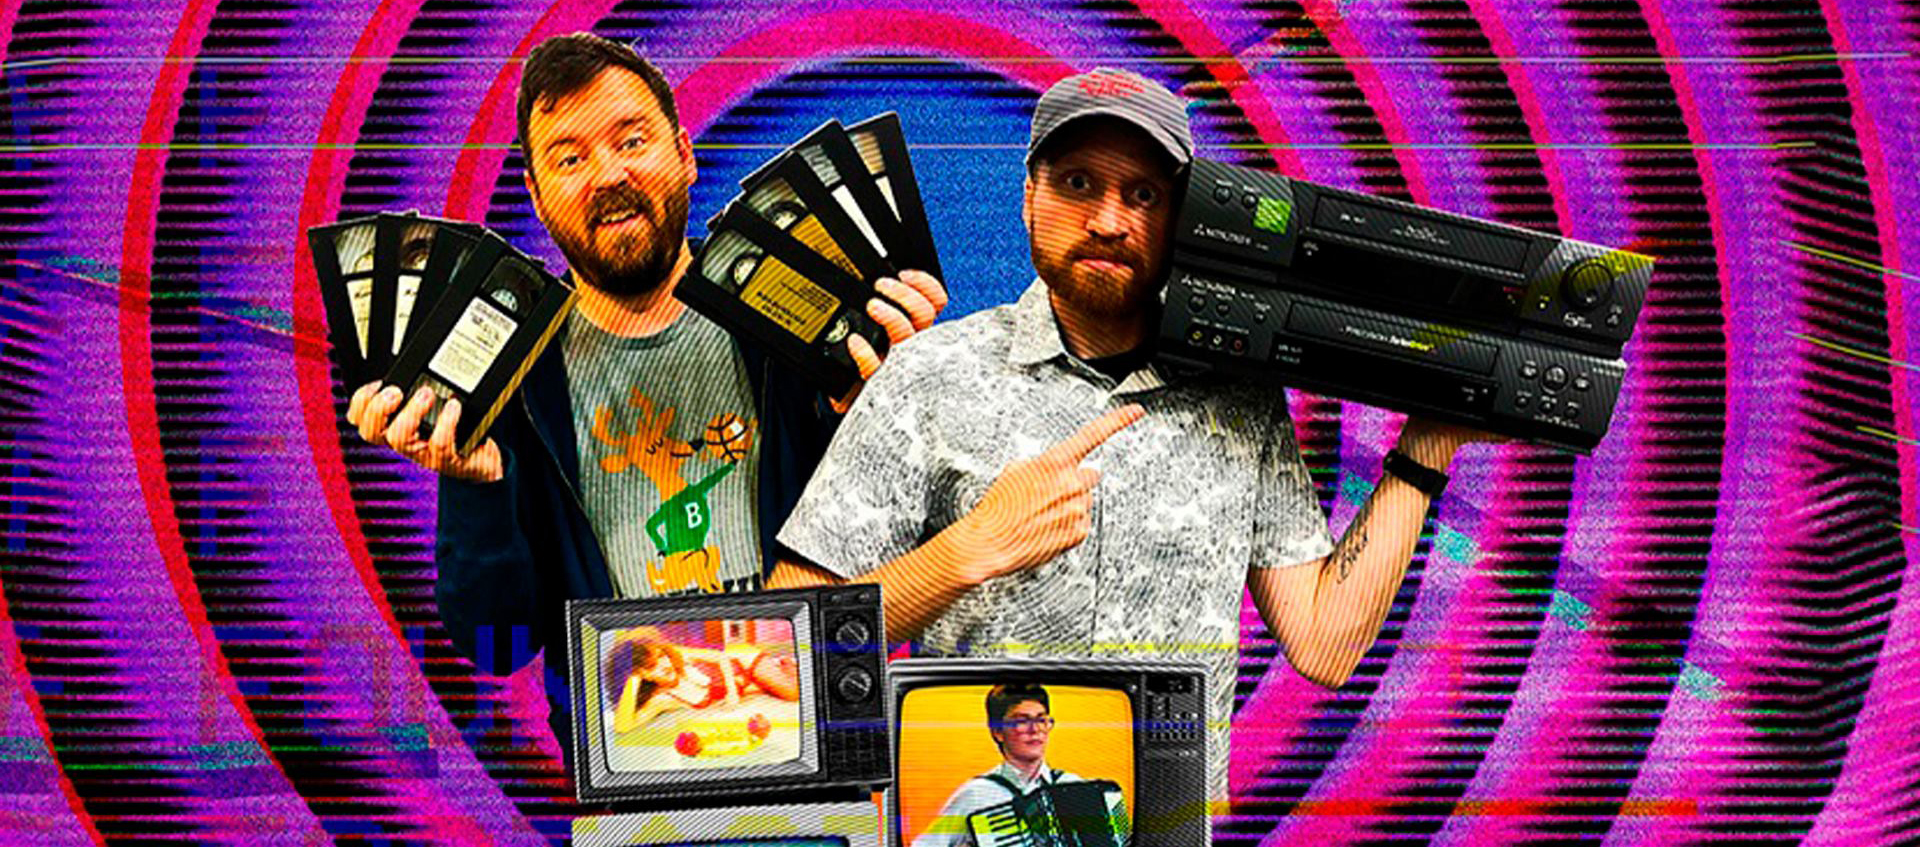 A bearded man holds three VHS tapes in each hand and next to him is a man in ball cap holding a VCR, below them are three televisions